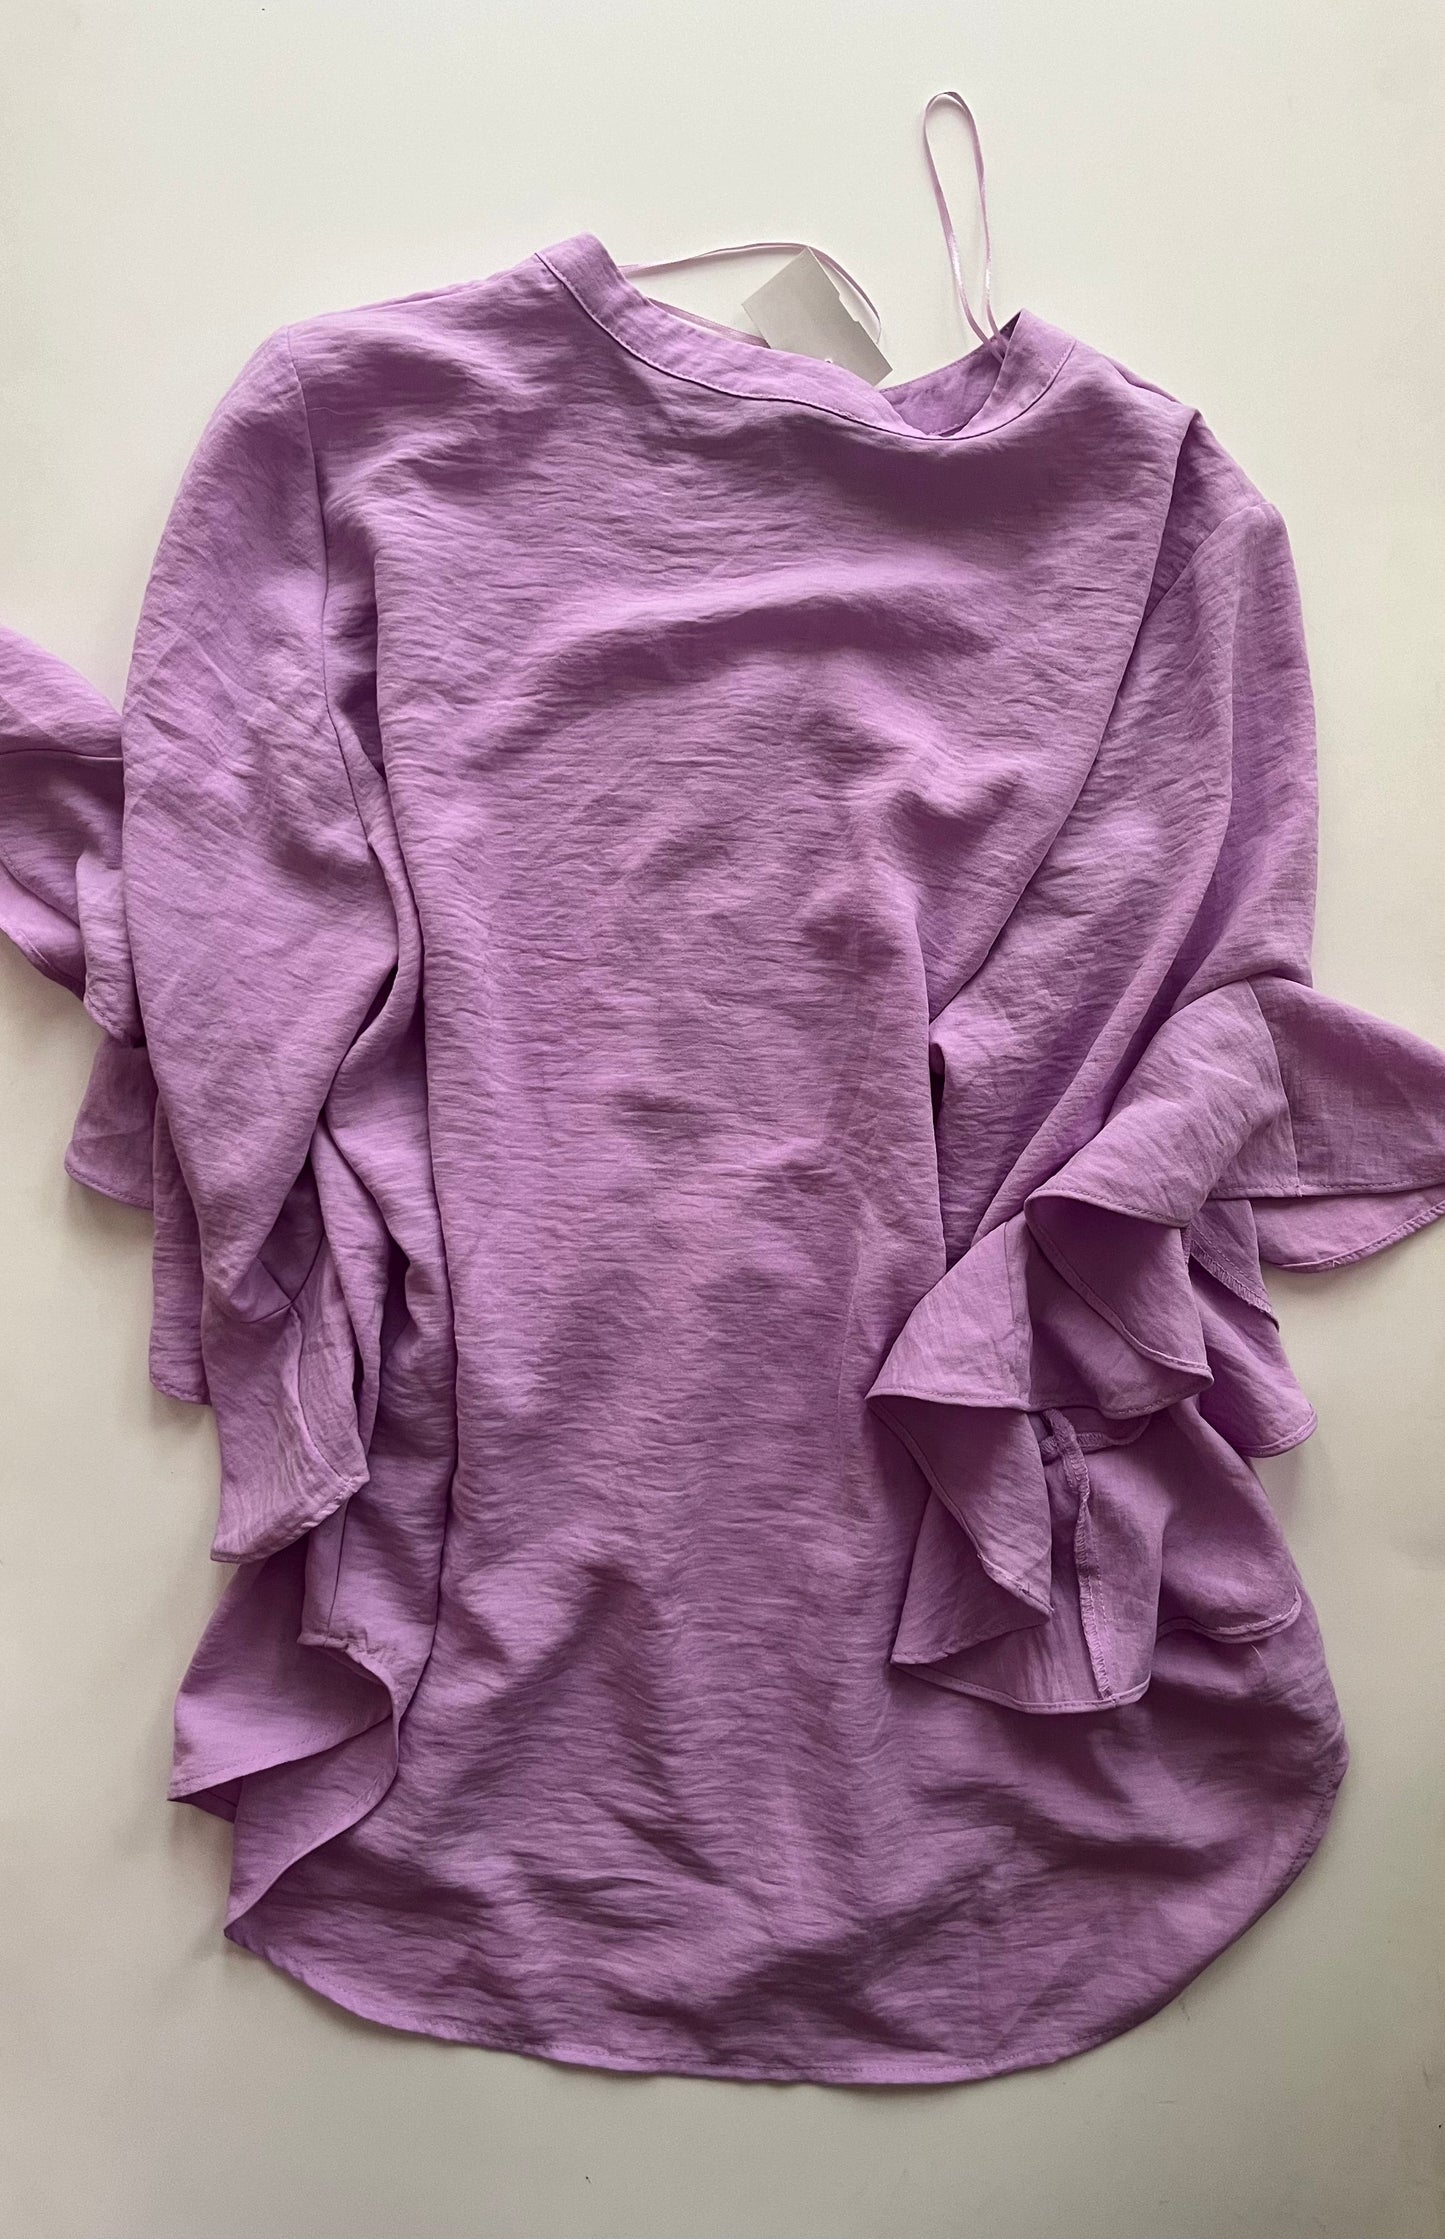 Purple Top 3/4 Sleeve Vince Camuto, Size Xl